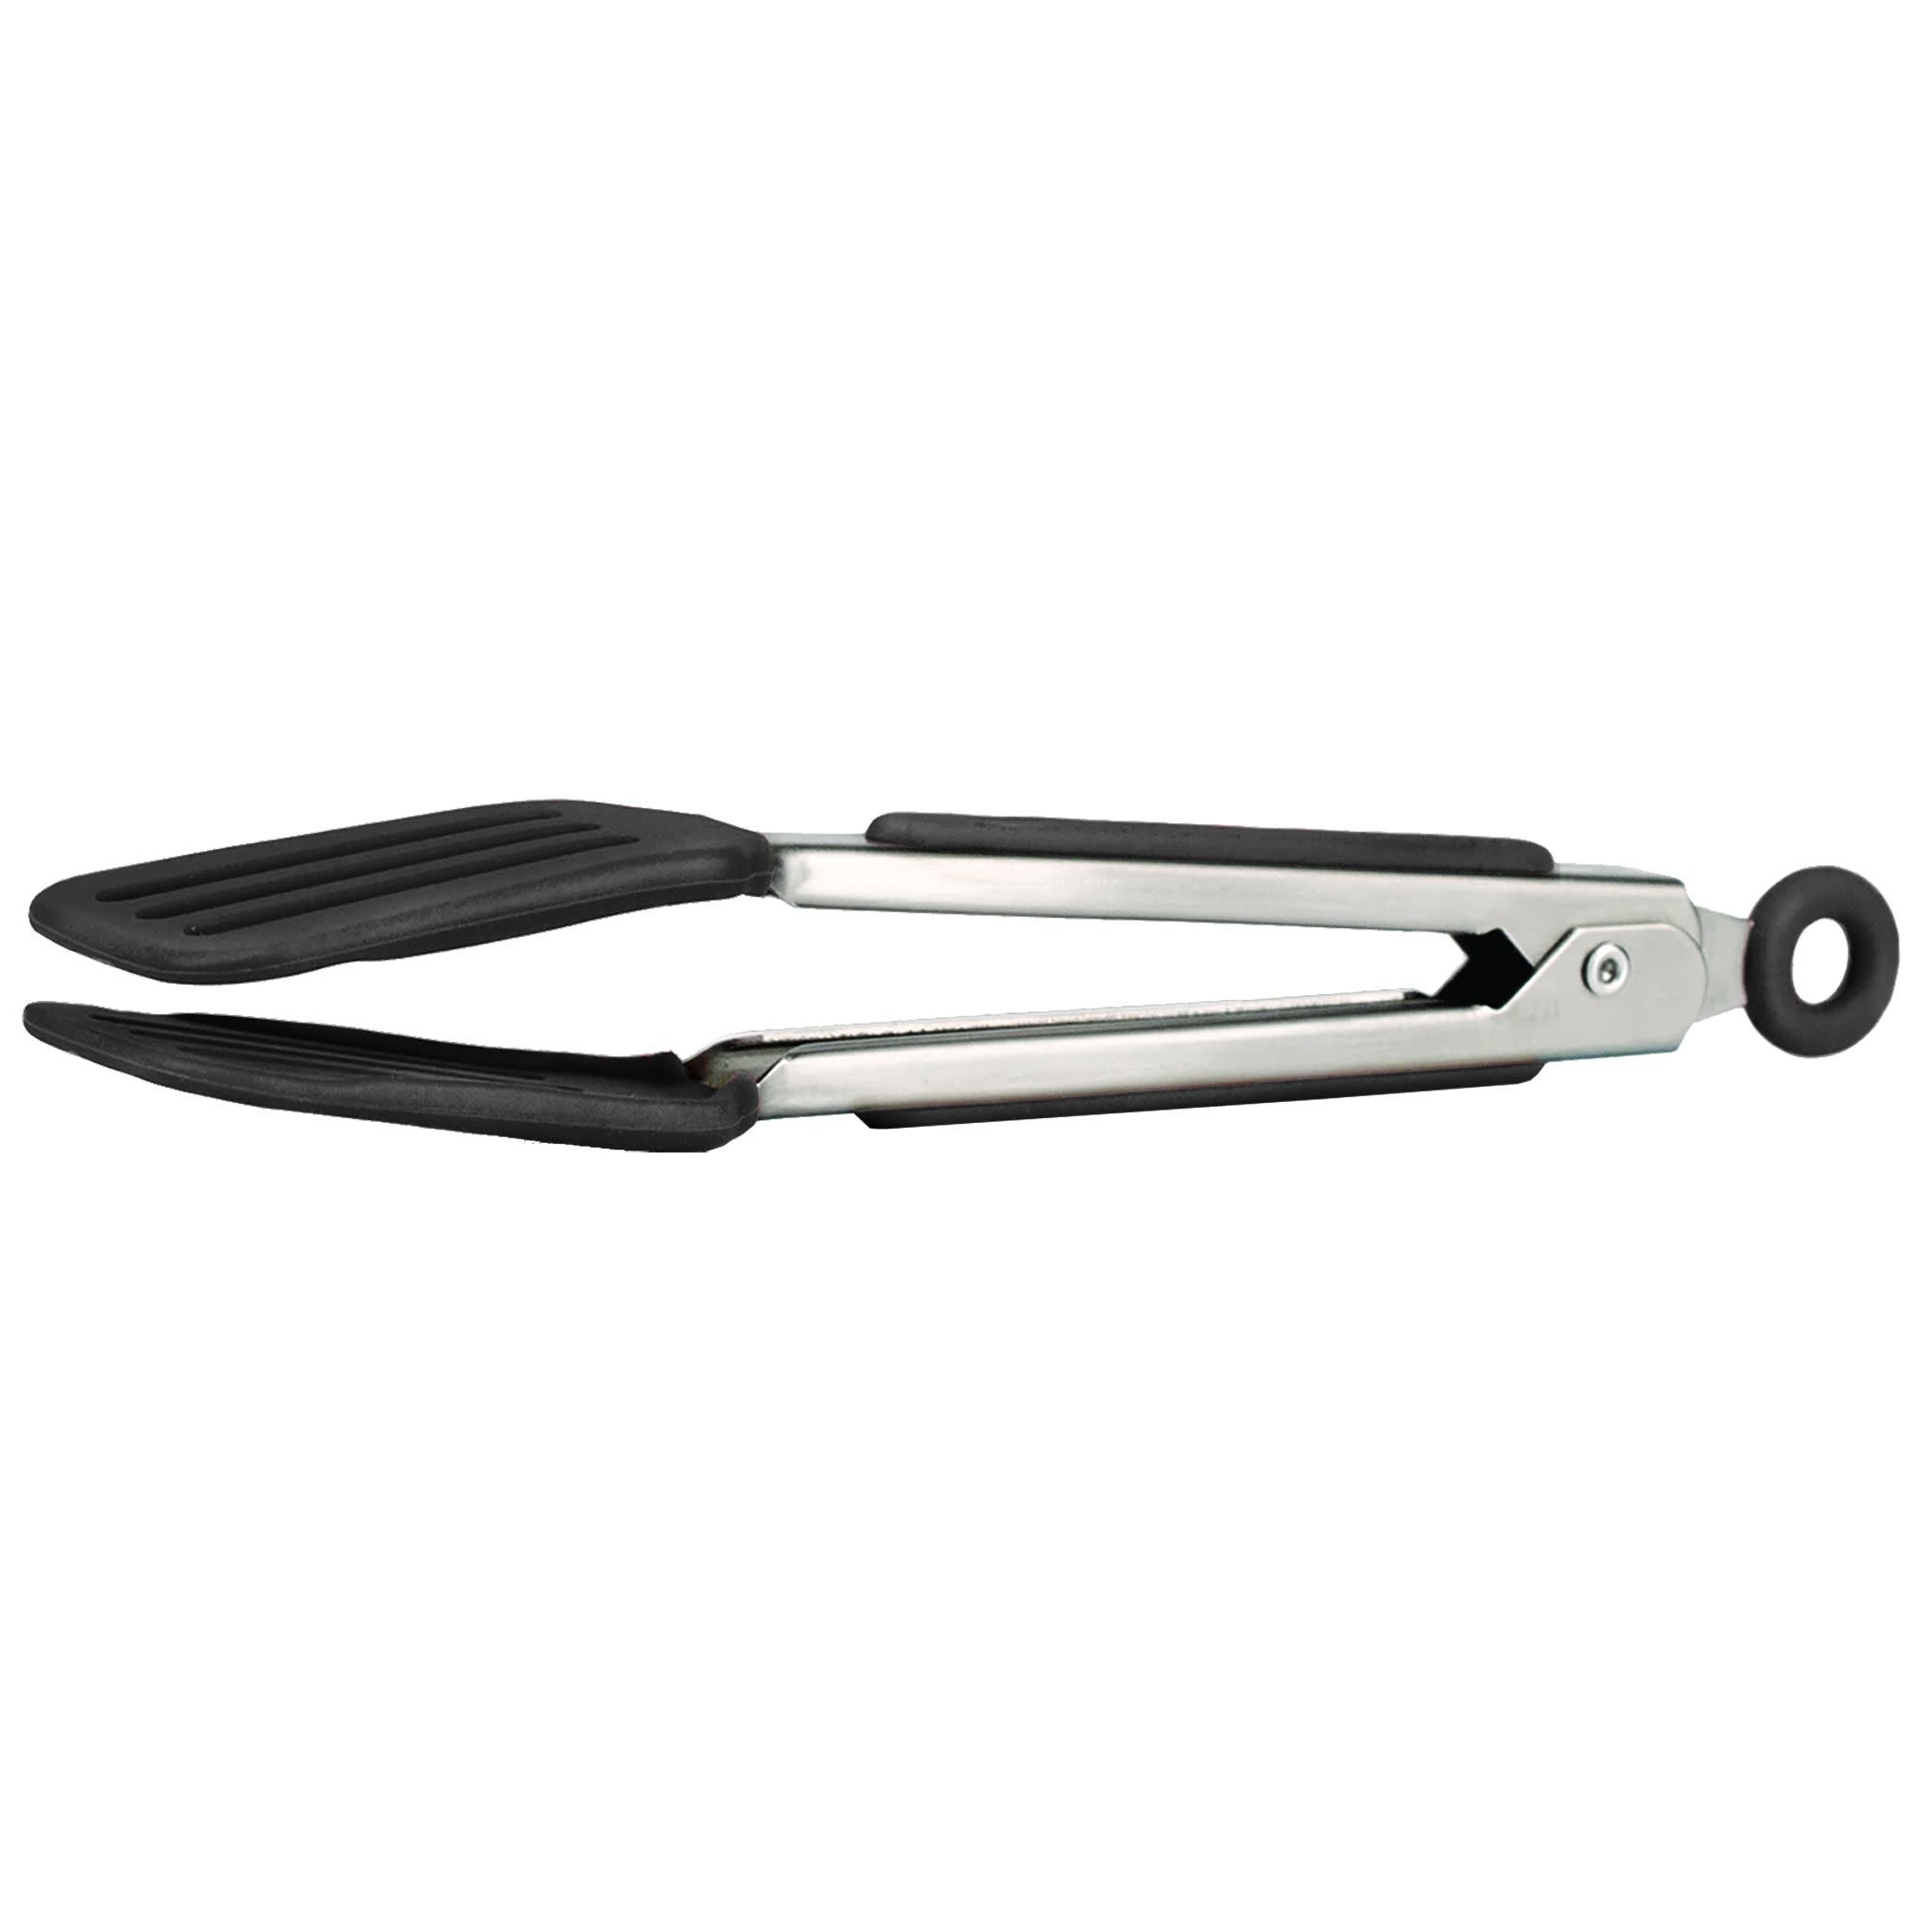  OXO Good Grips 7-Inch Mini Tongs, Stainless Steel